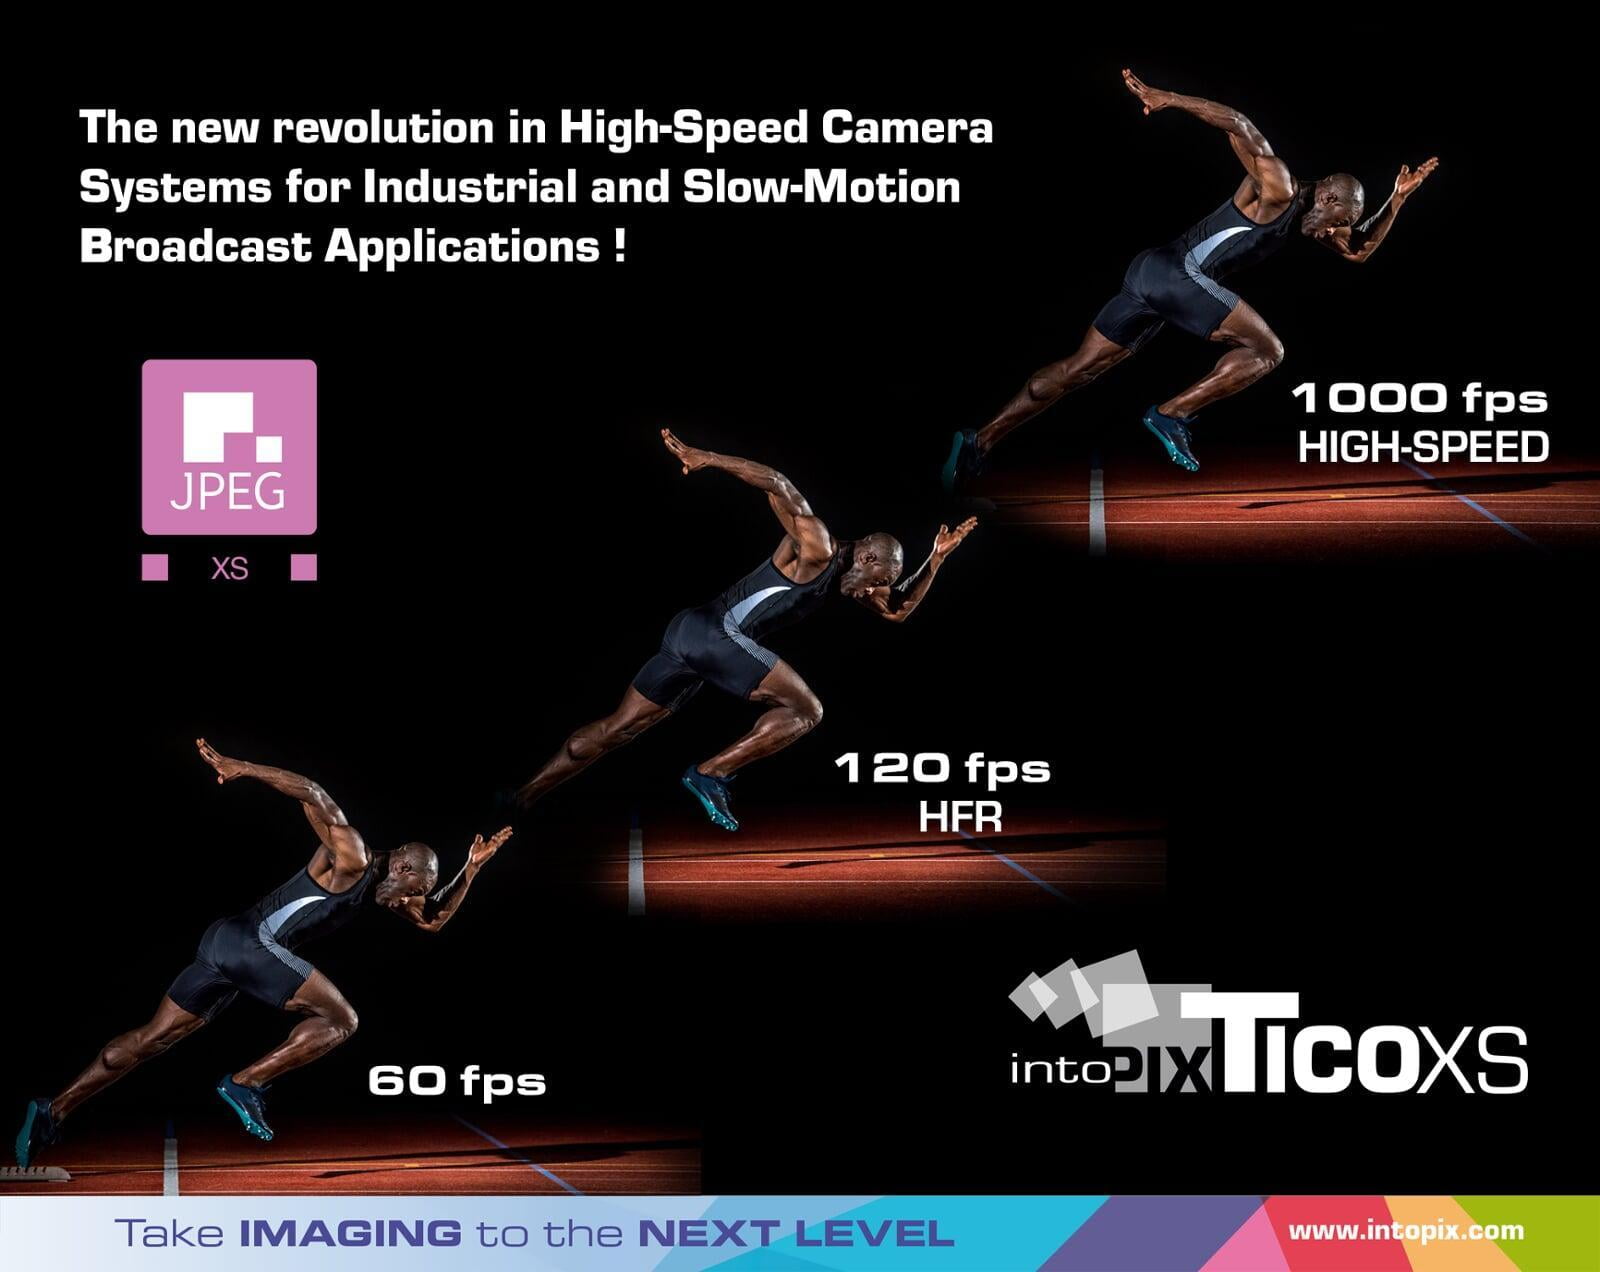 intoPIX enables JPEG XS high frame rates real-time encoding from 120fps to more than 1000fps with the TicoXS FPGA IP cores